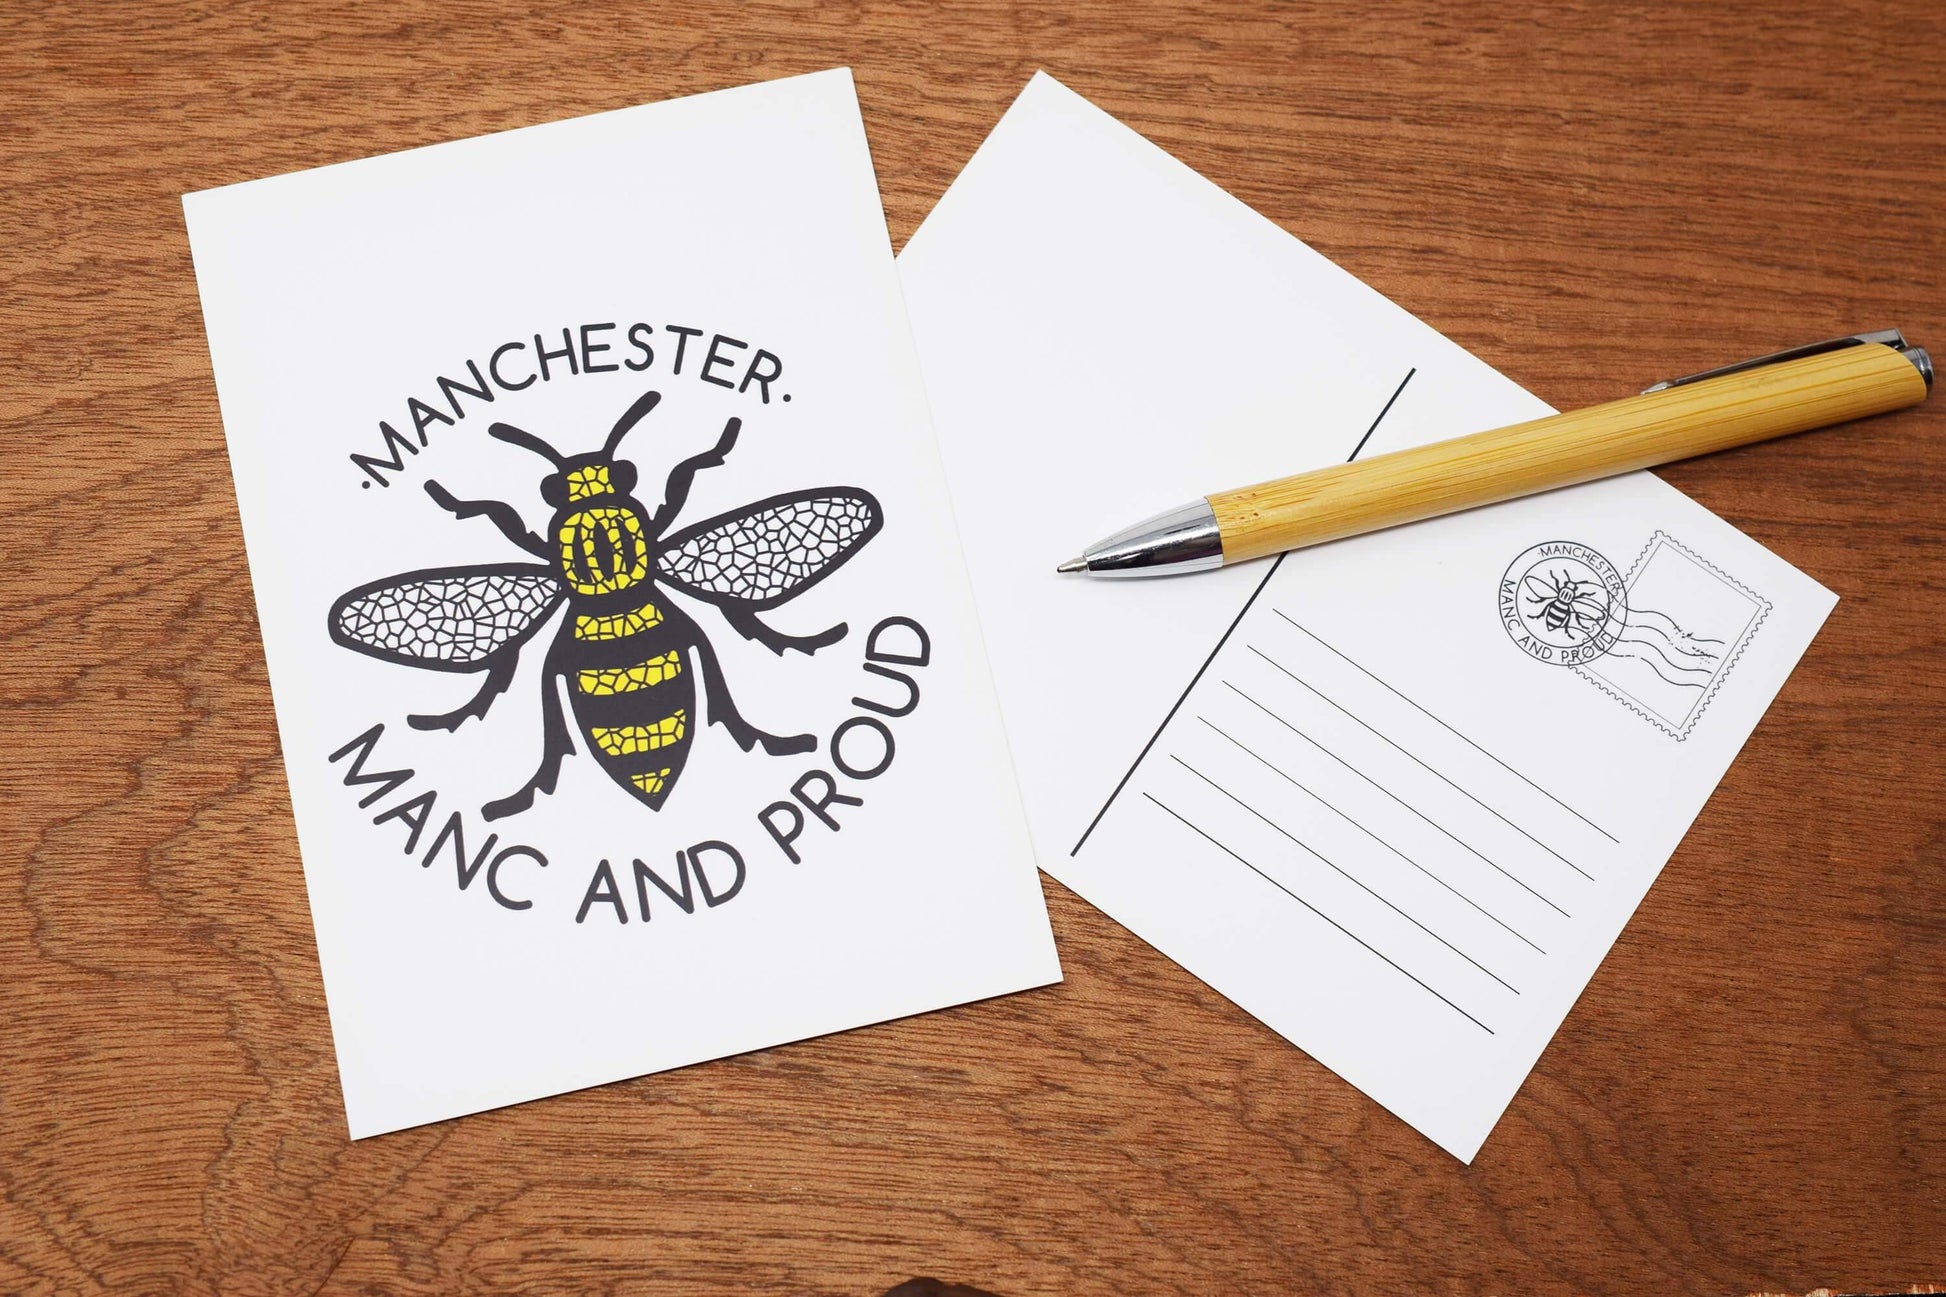 Pack of 3 Manchester Postcards - Choose Your Designs! - The Manchester Shop